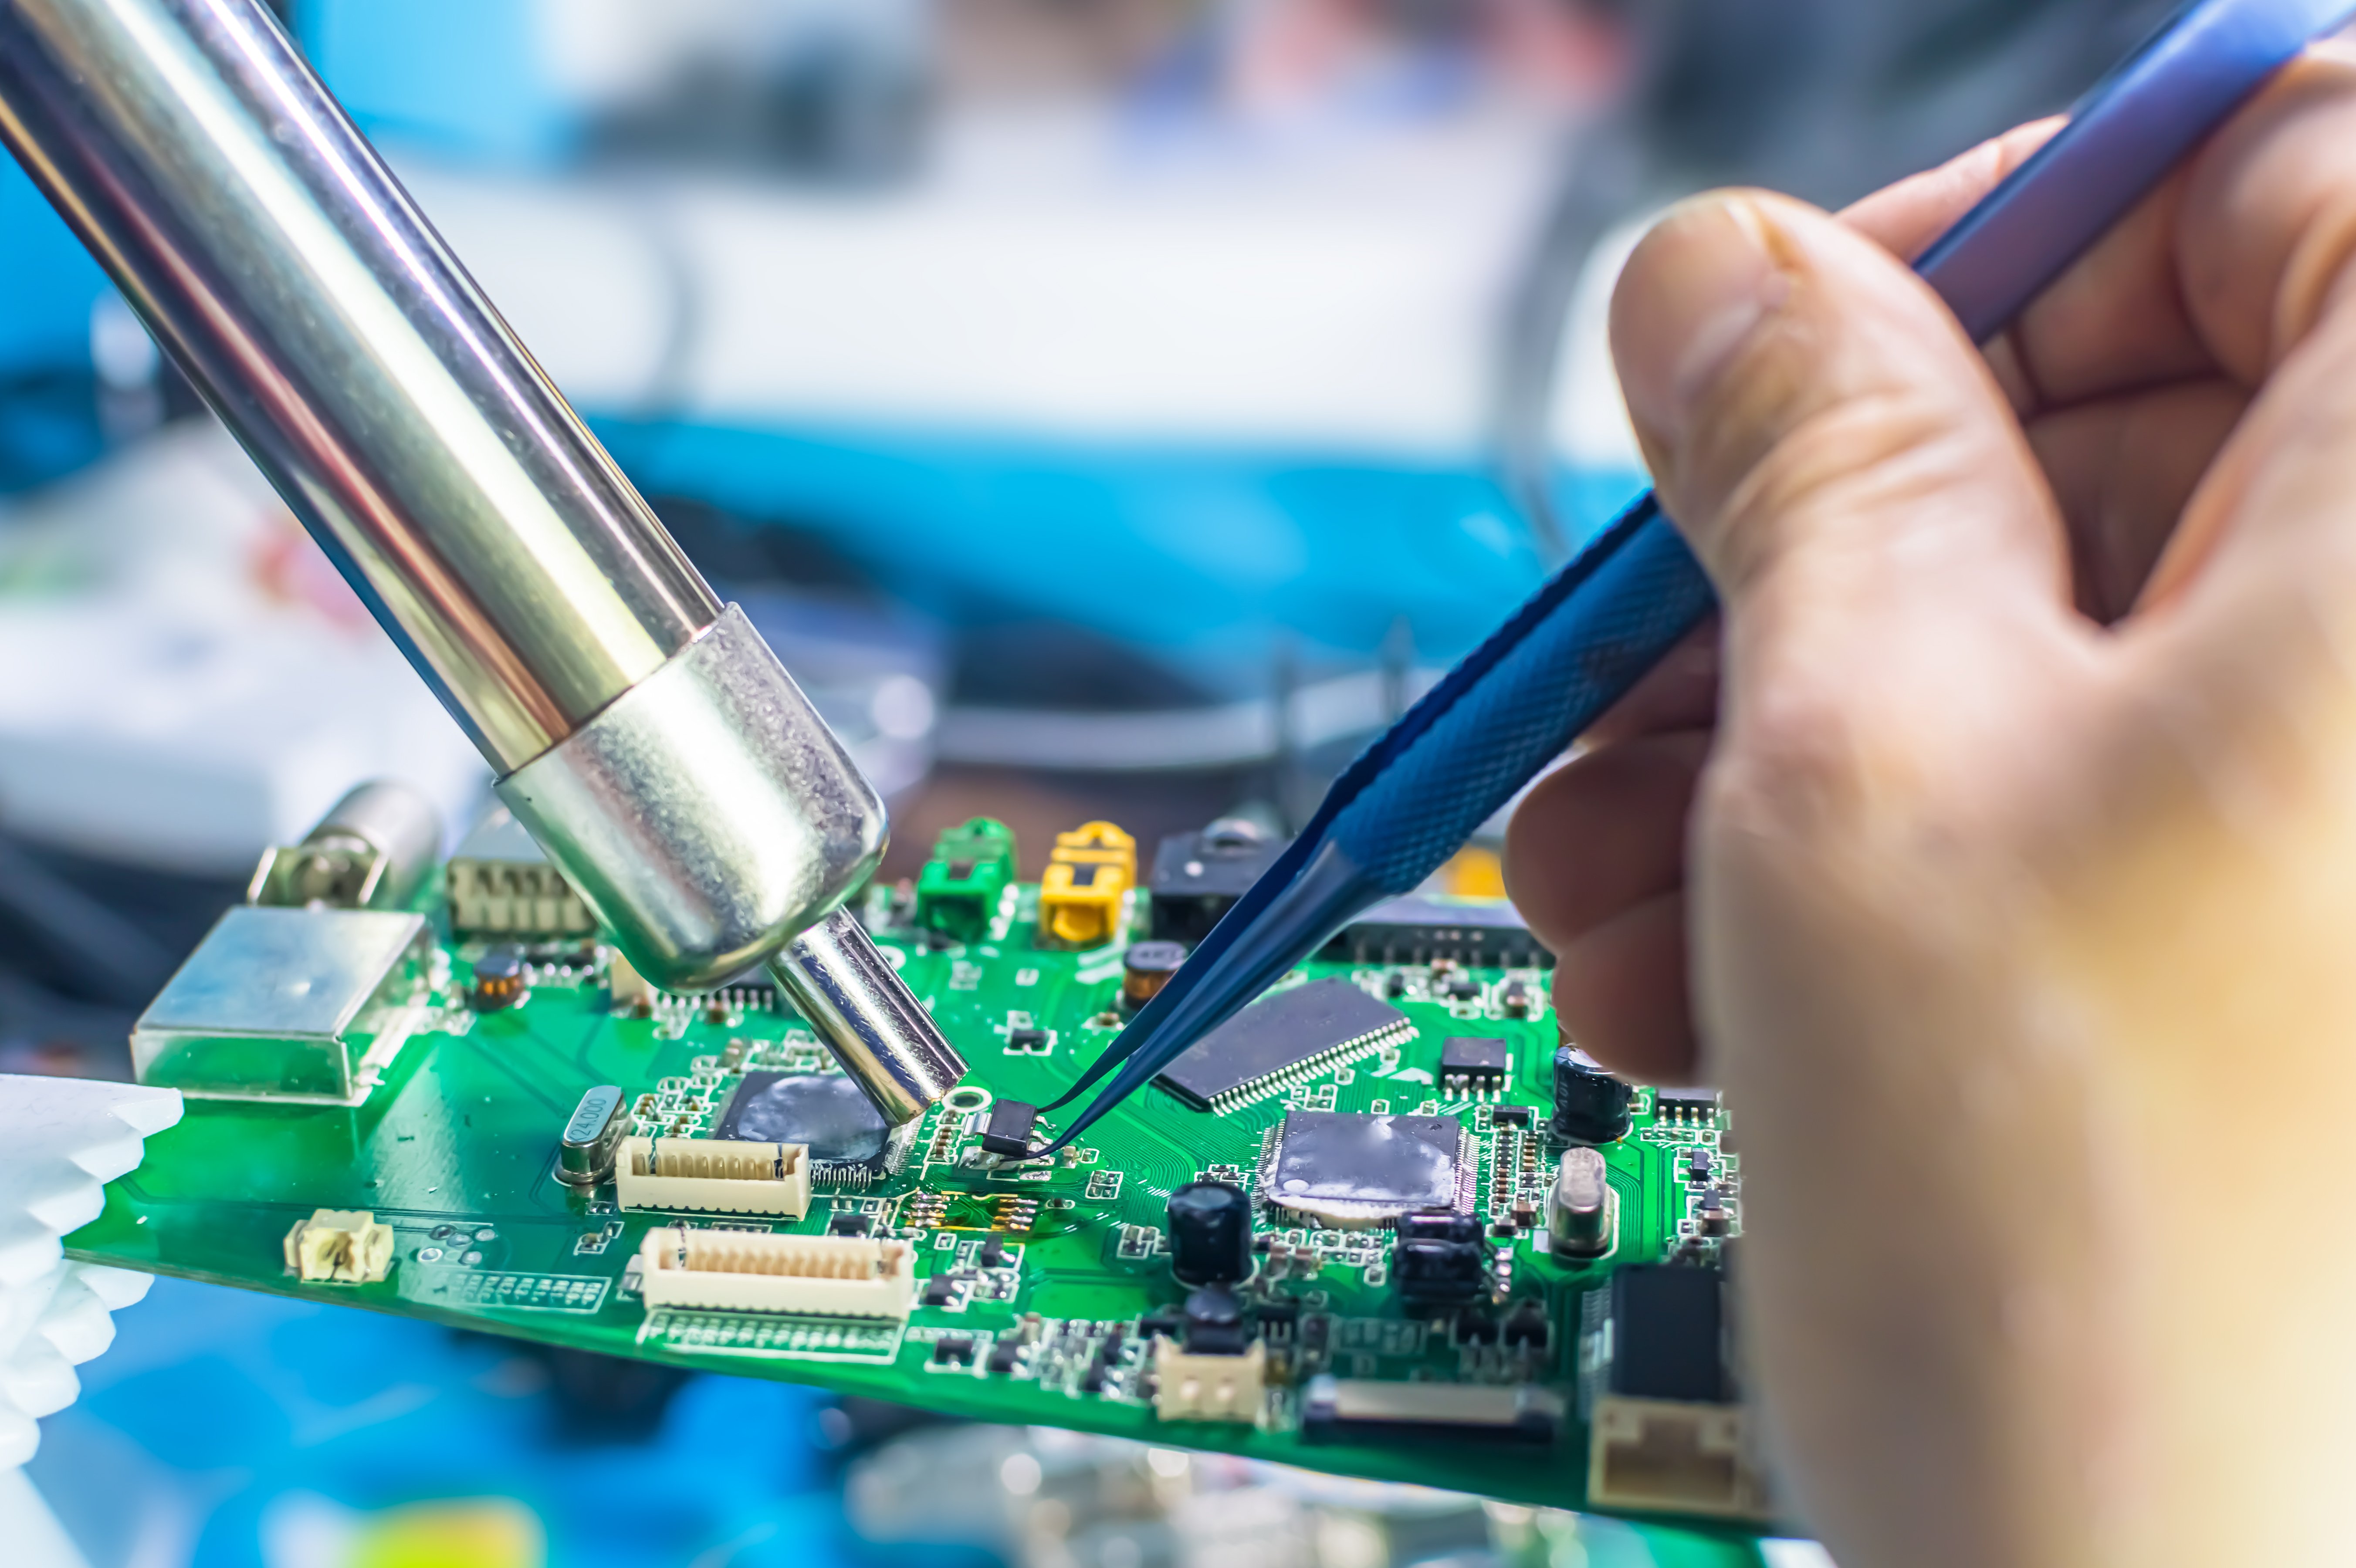 3 Key Benefits of Investing in Solder Training and IPC Certification